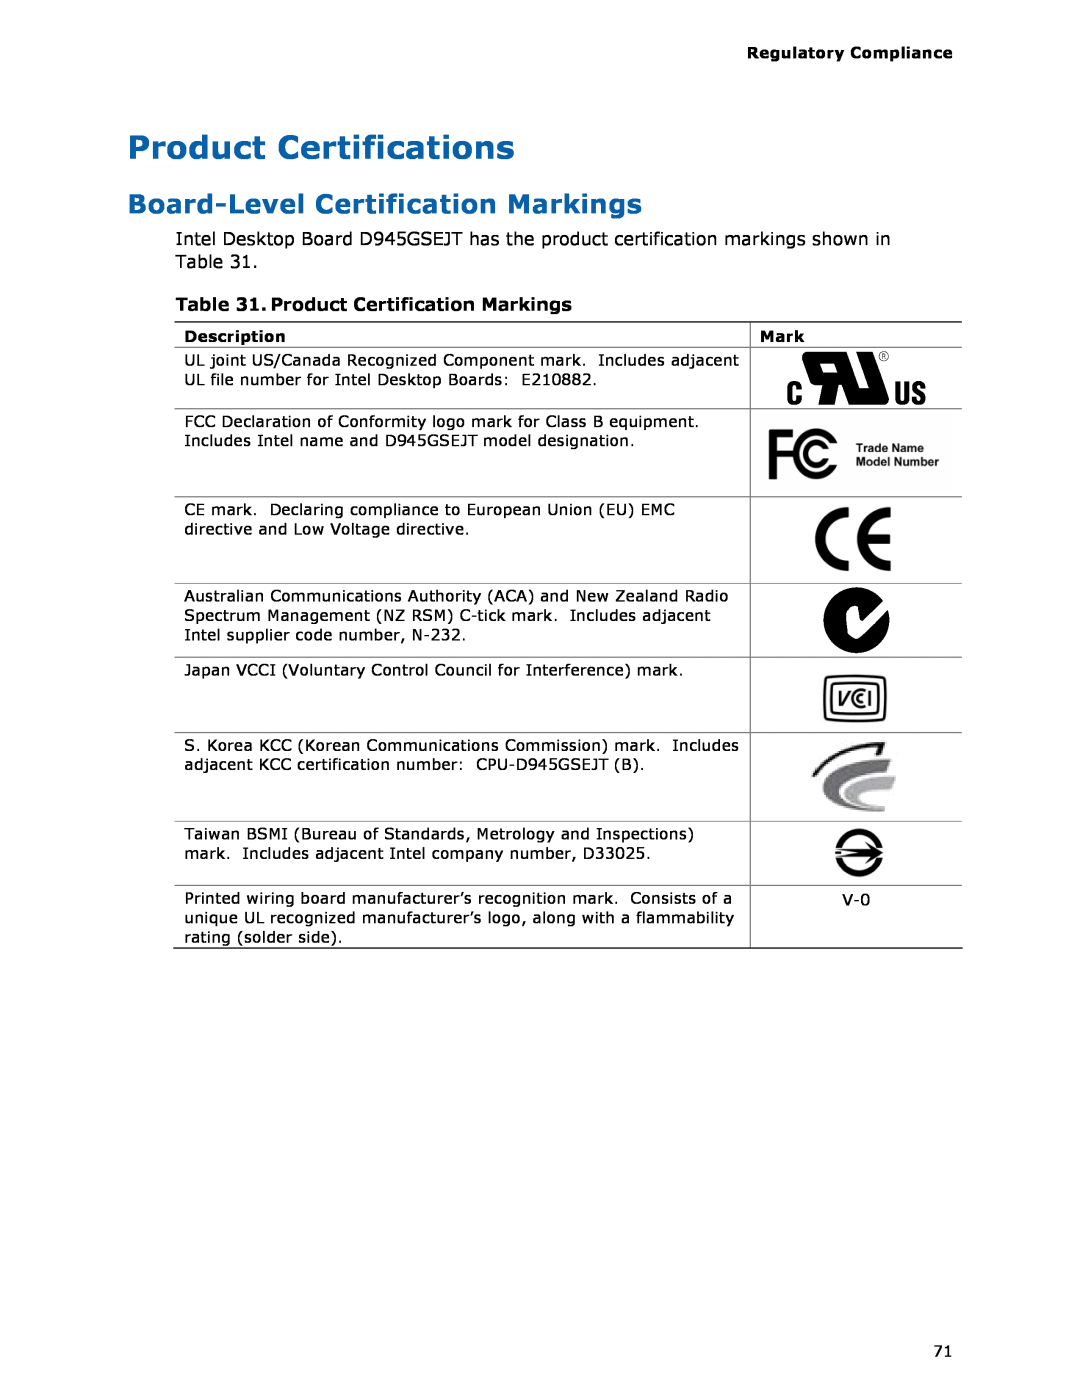 Intel D945GSEJT manual Product Certifications, Board-LevelCertification Markings, Product Certification Markings 